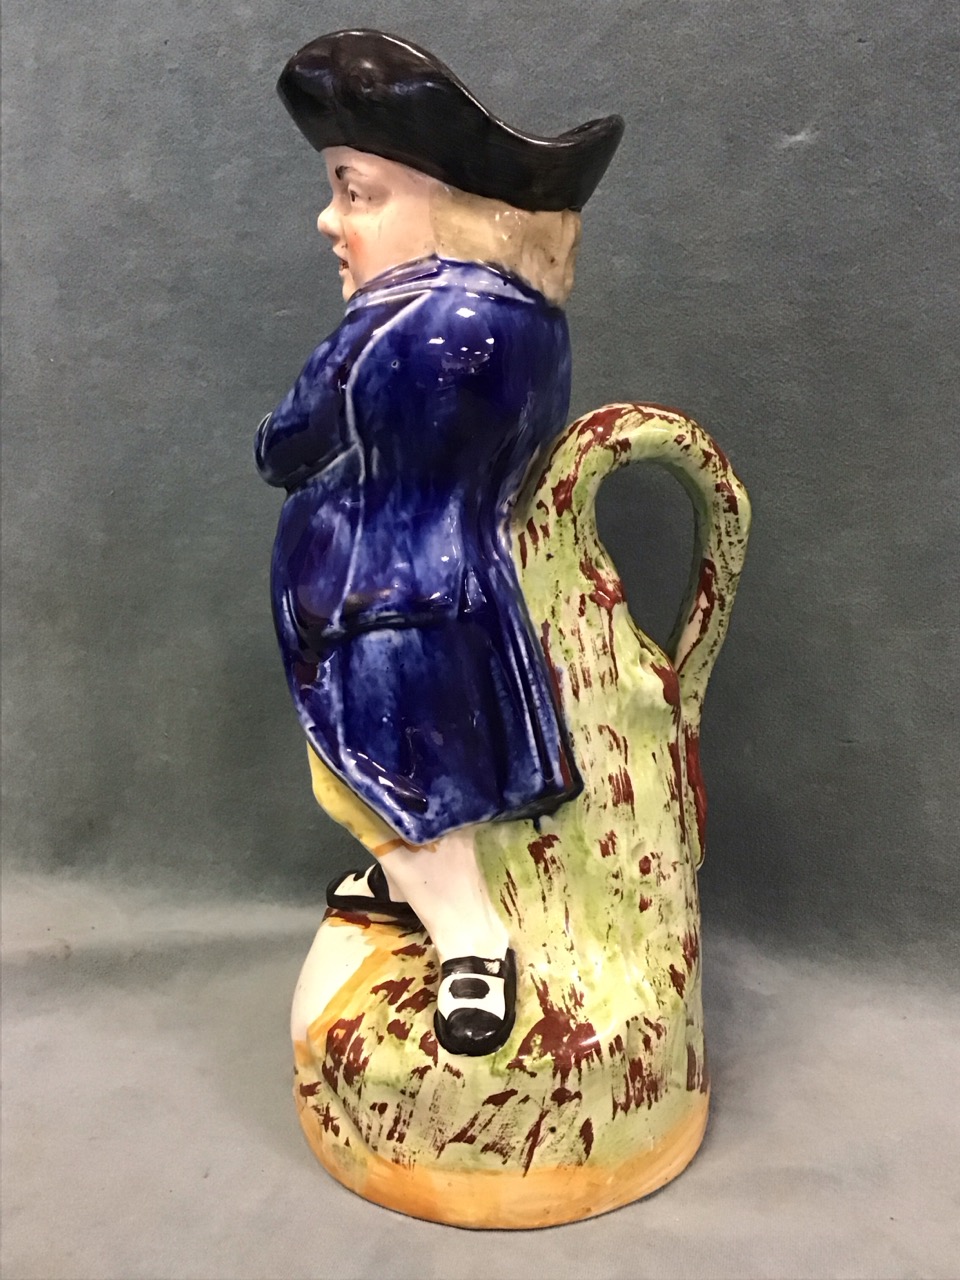 A C19th Staffordshire ceramic hearty goodfellow toby jug, the standing smiling figure holding a pipe - Image 2 of 3